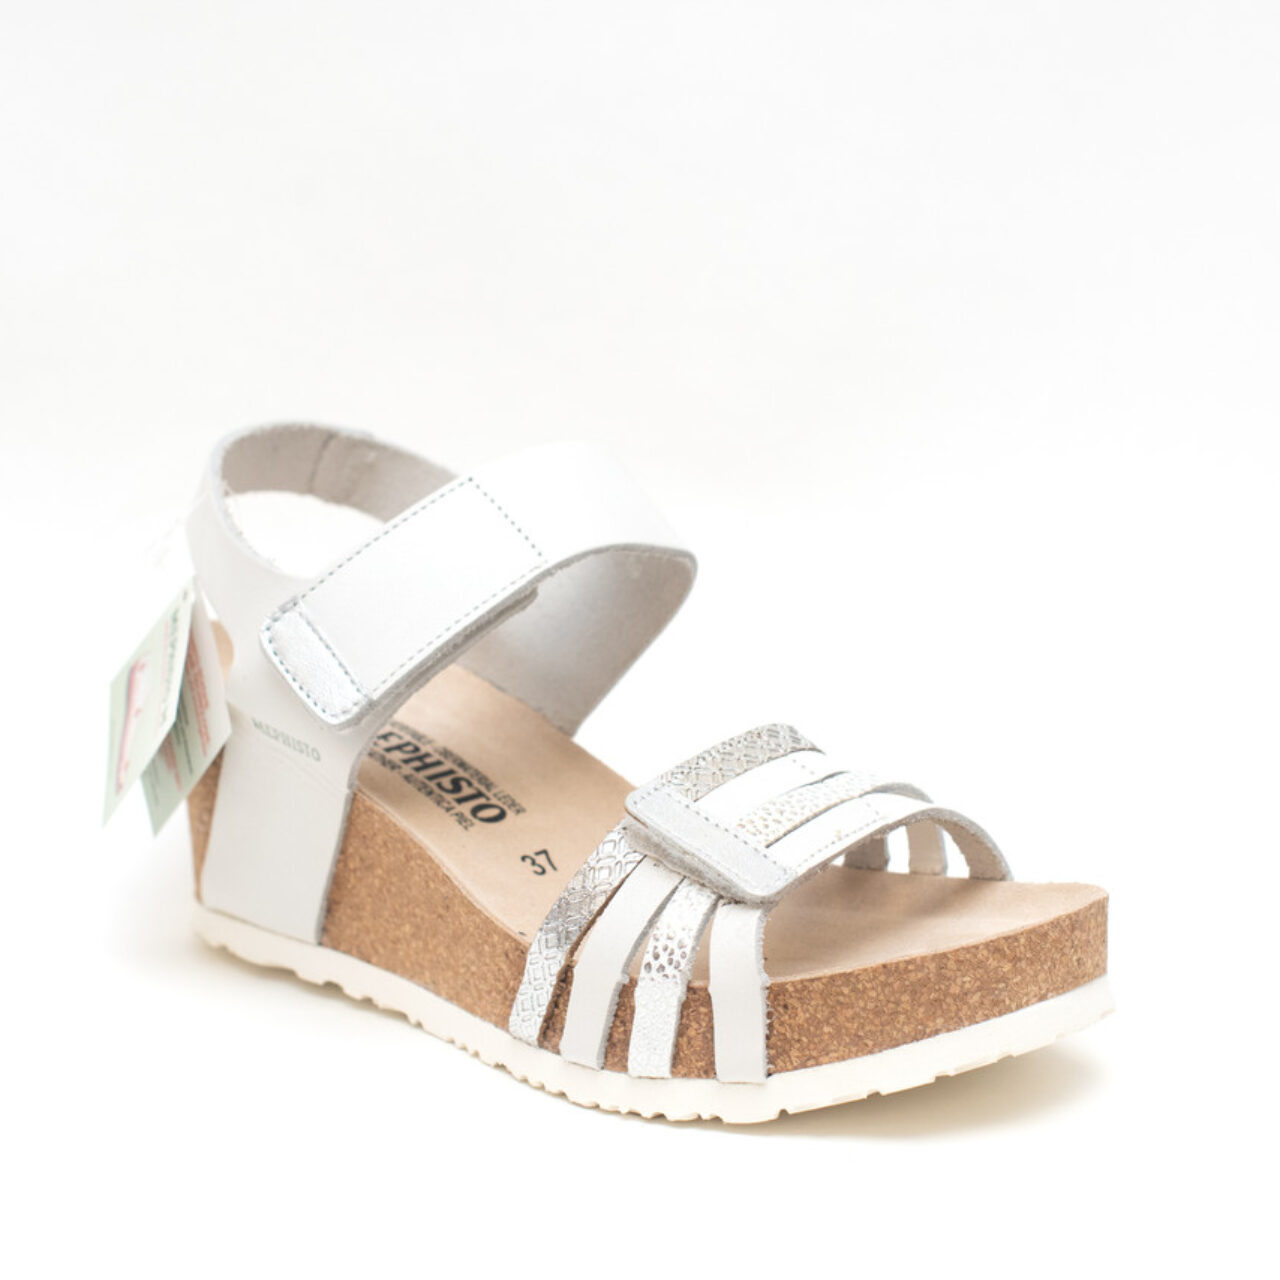 Mephisto Lucia White – Miller Shoes